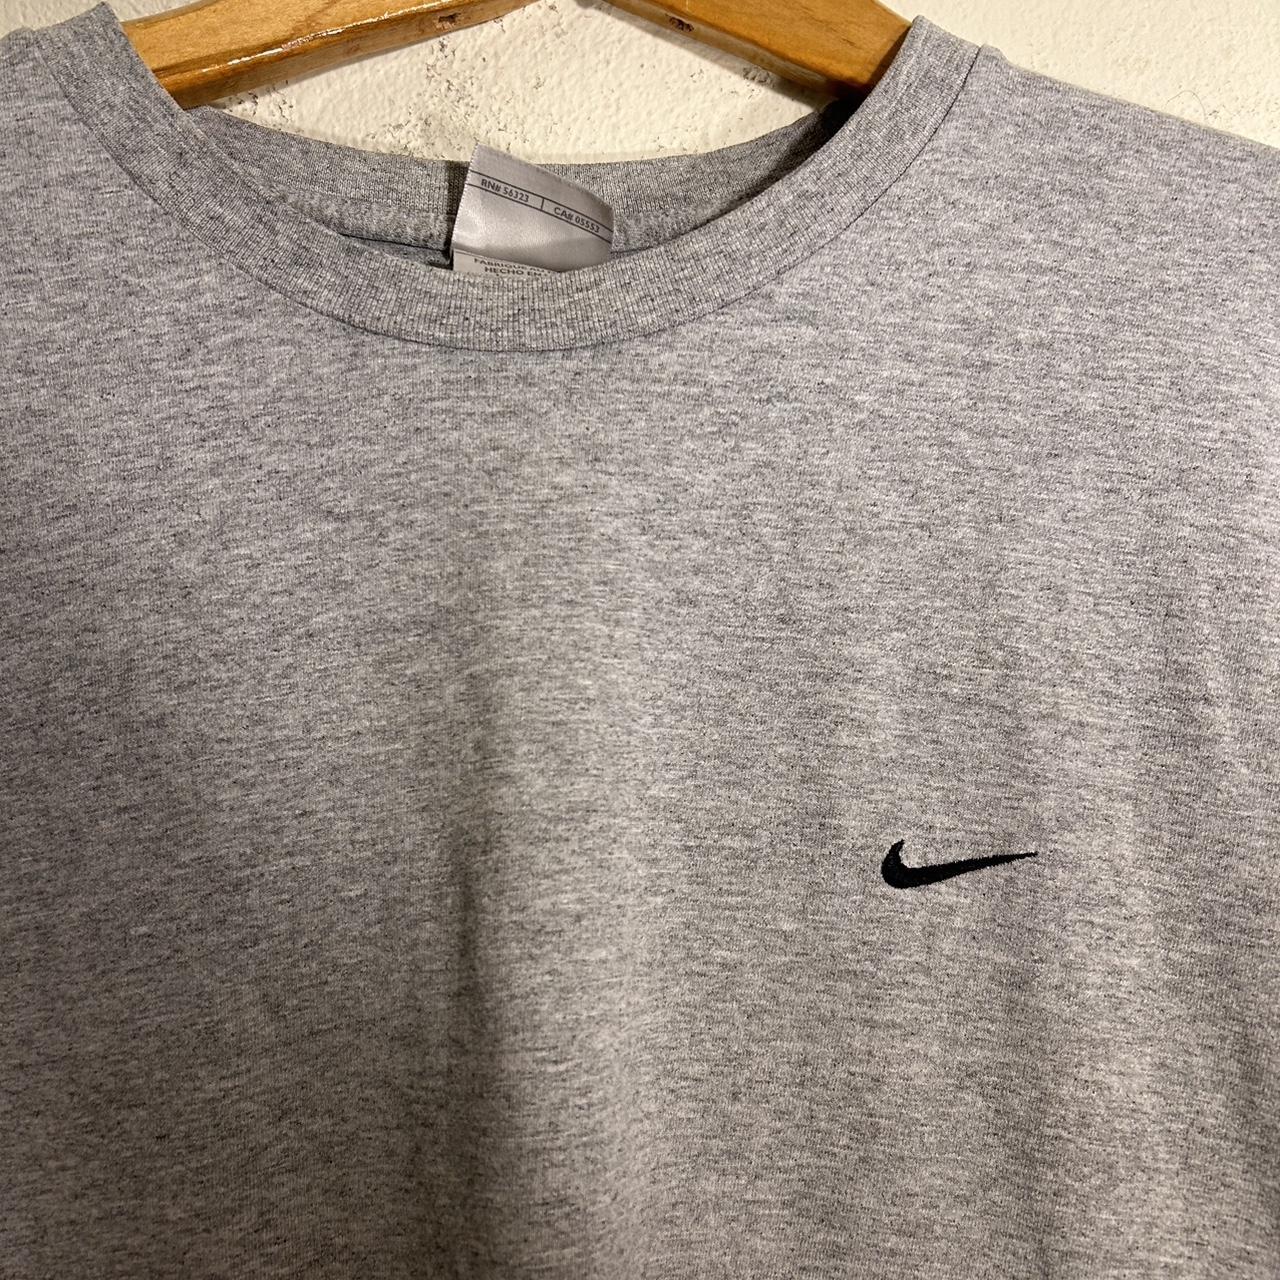 Grey Tag Nike Stitched Mexico Made Length- 29... - Depop